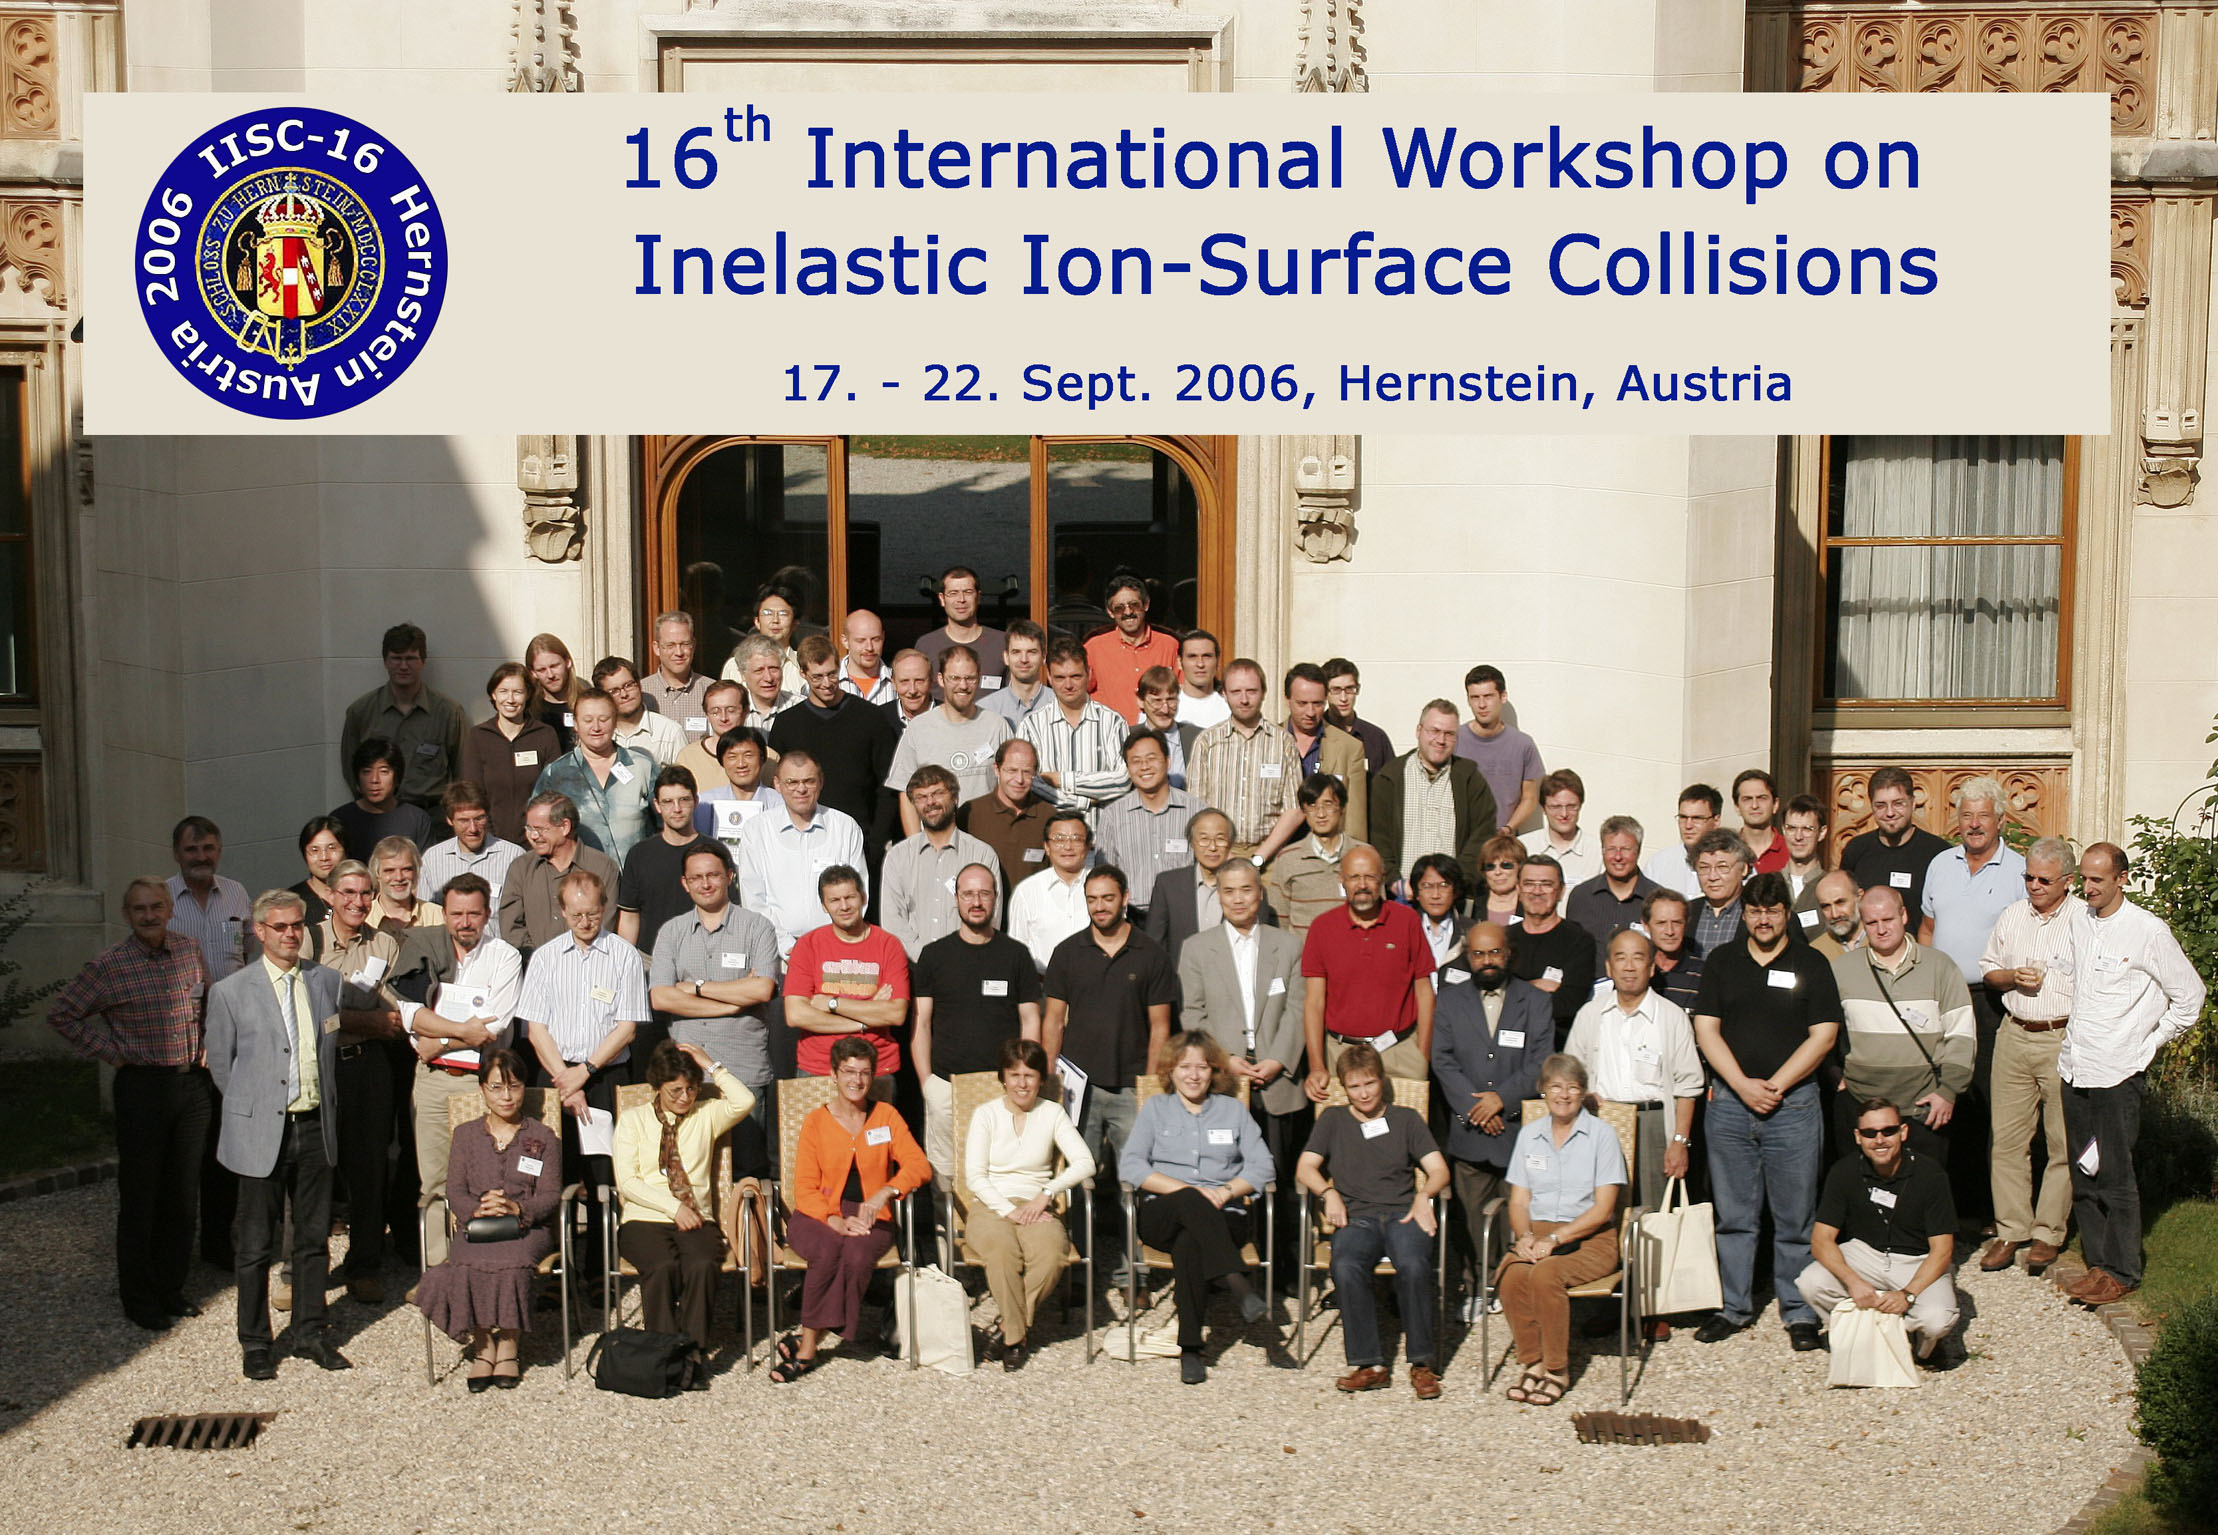 Conference site: IISC-16 Workshop Photo